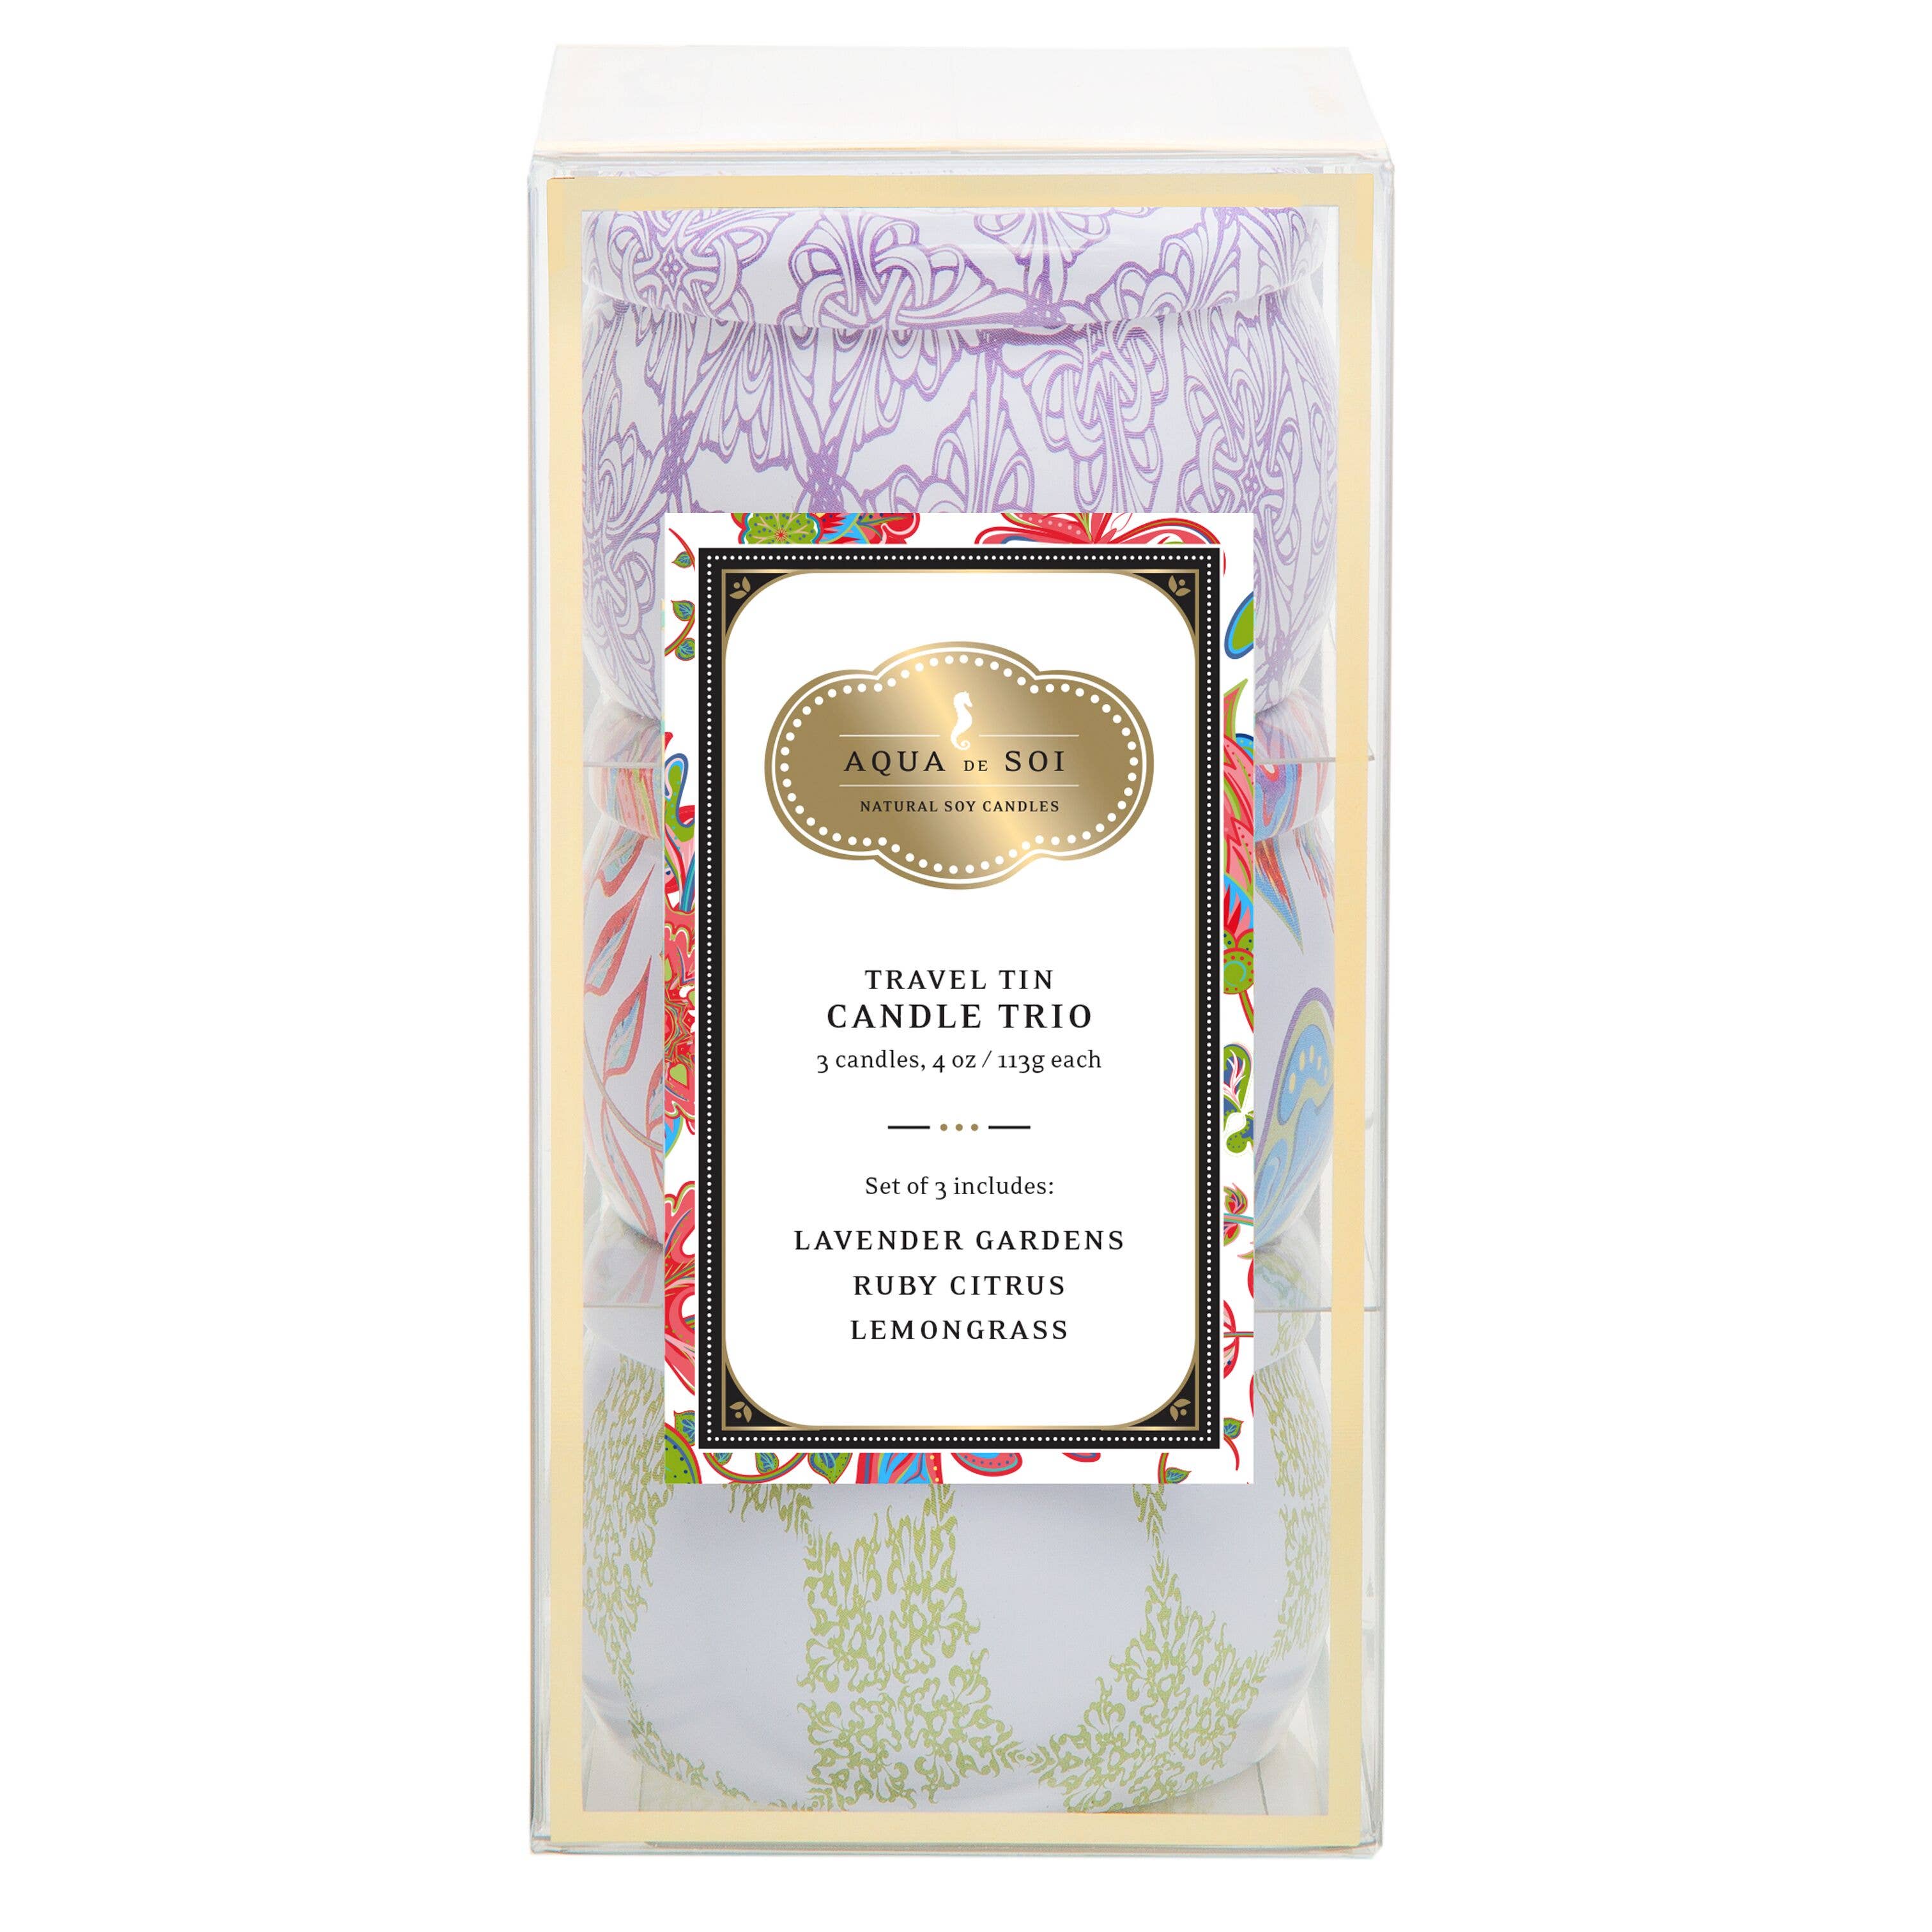 Classic Travel Tin Soy Candle Trio Set